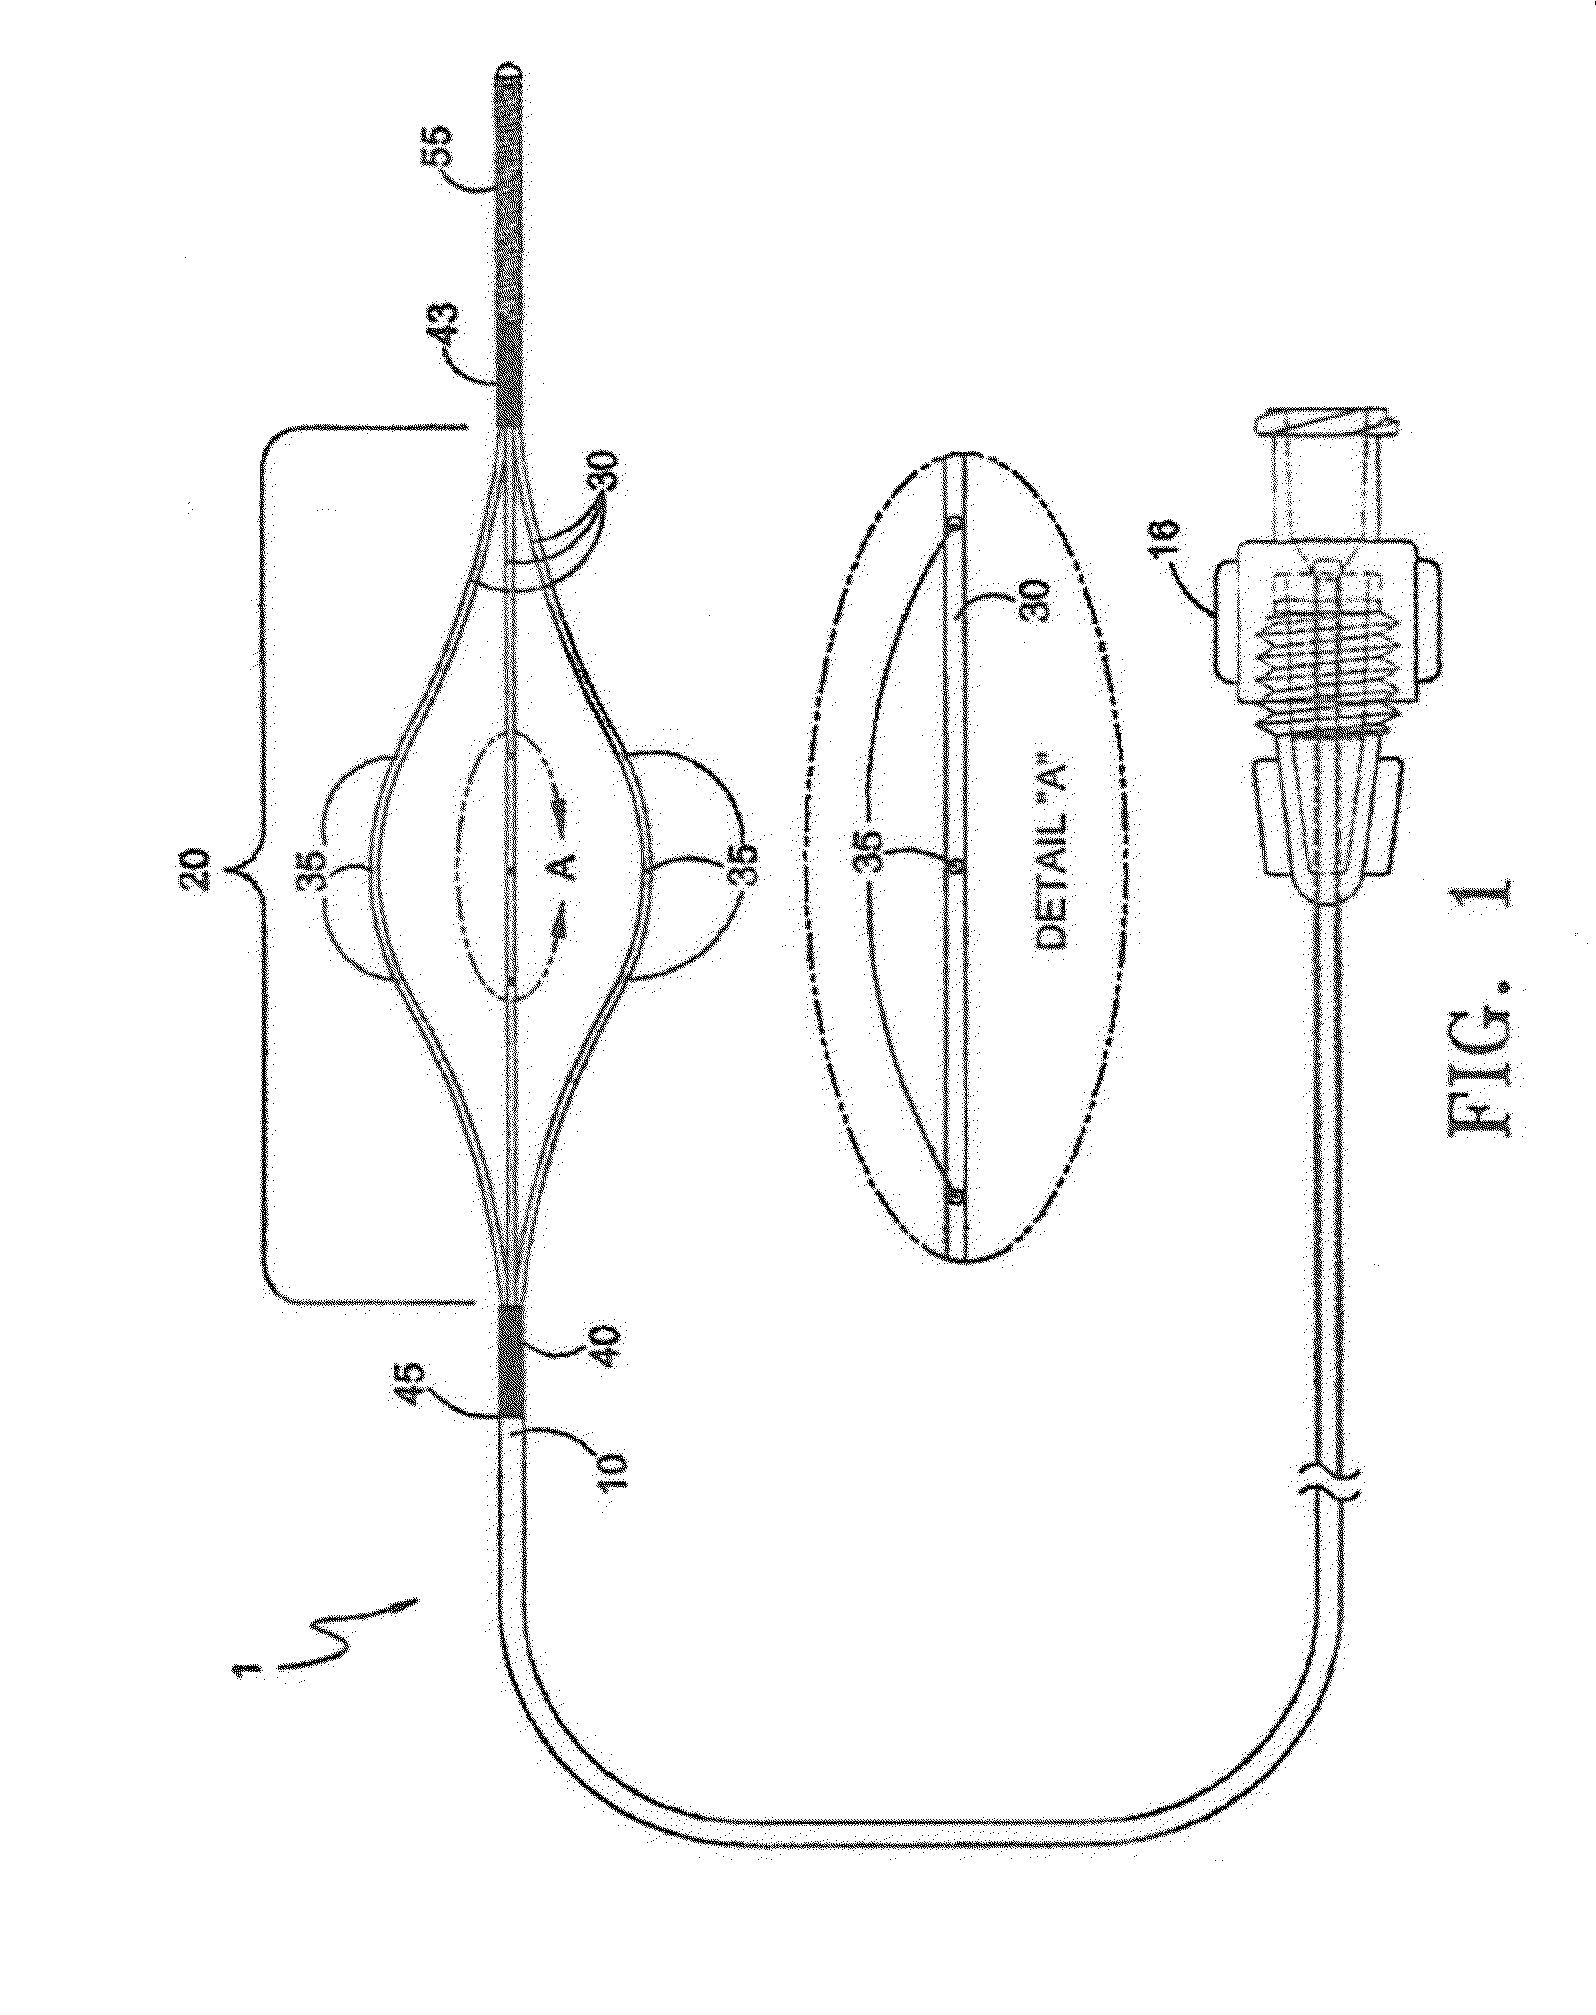 Fluid Delivery and Treatment Device and Method of Use